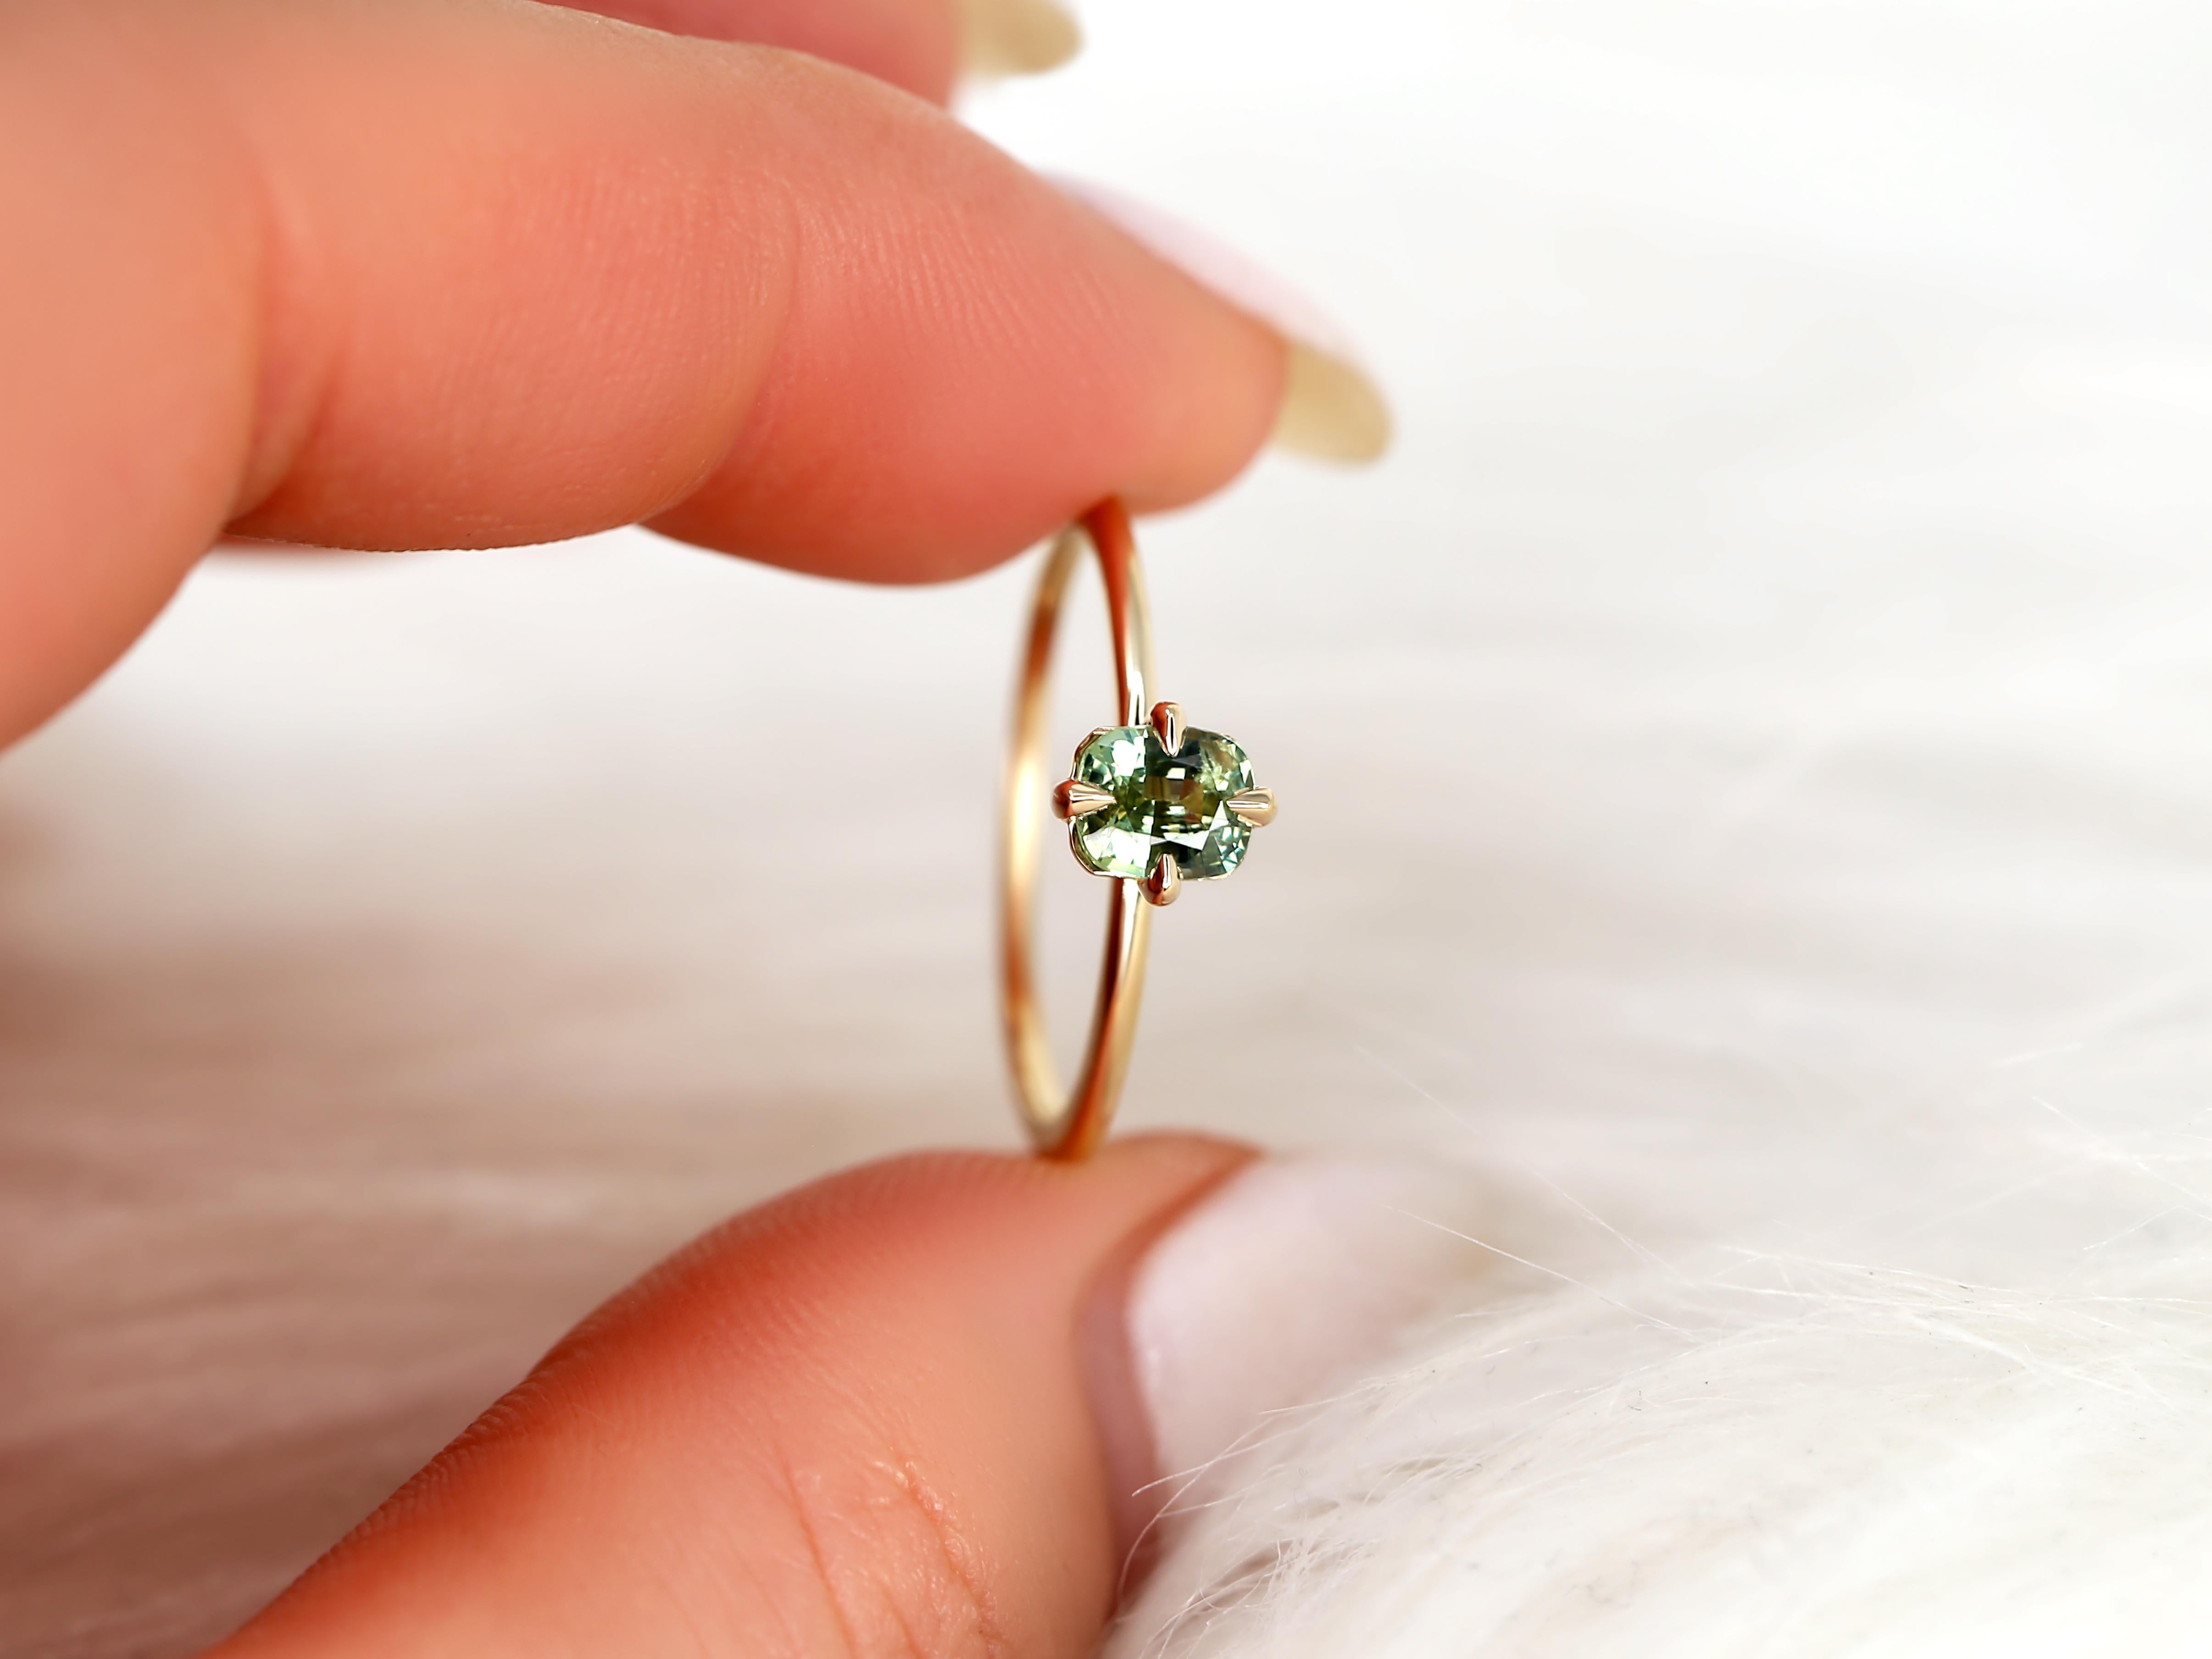 Get ready to shine with this sapphire Rita ring. Its radiant cut and beautiful green tea teal sapphire center stone are perfect for the sophisticated individual who wants to sparkle. Flaunt it on its own or pair it with some delicate diamond bands